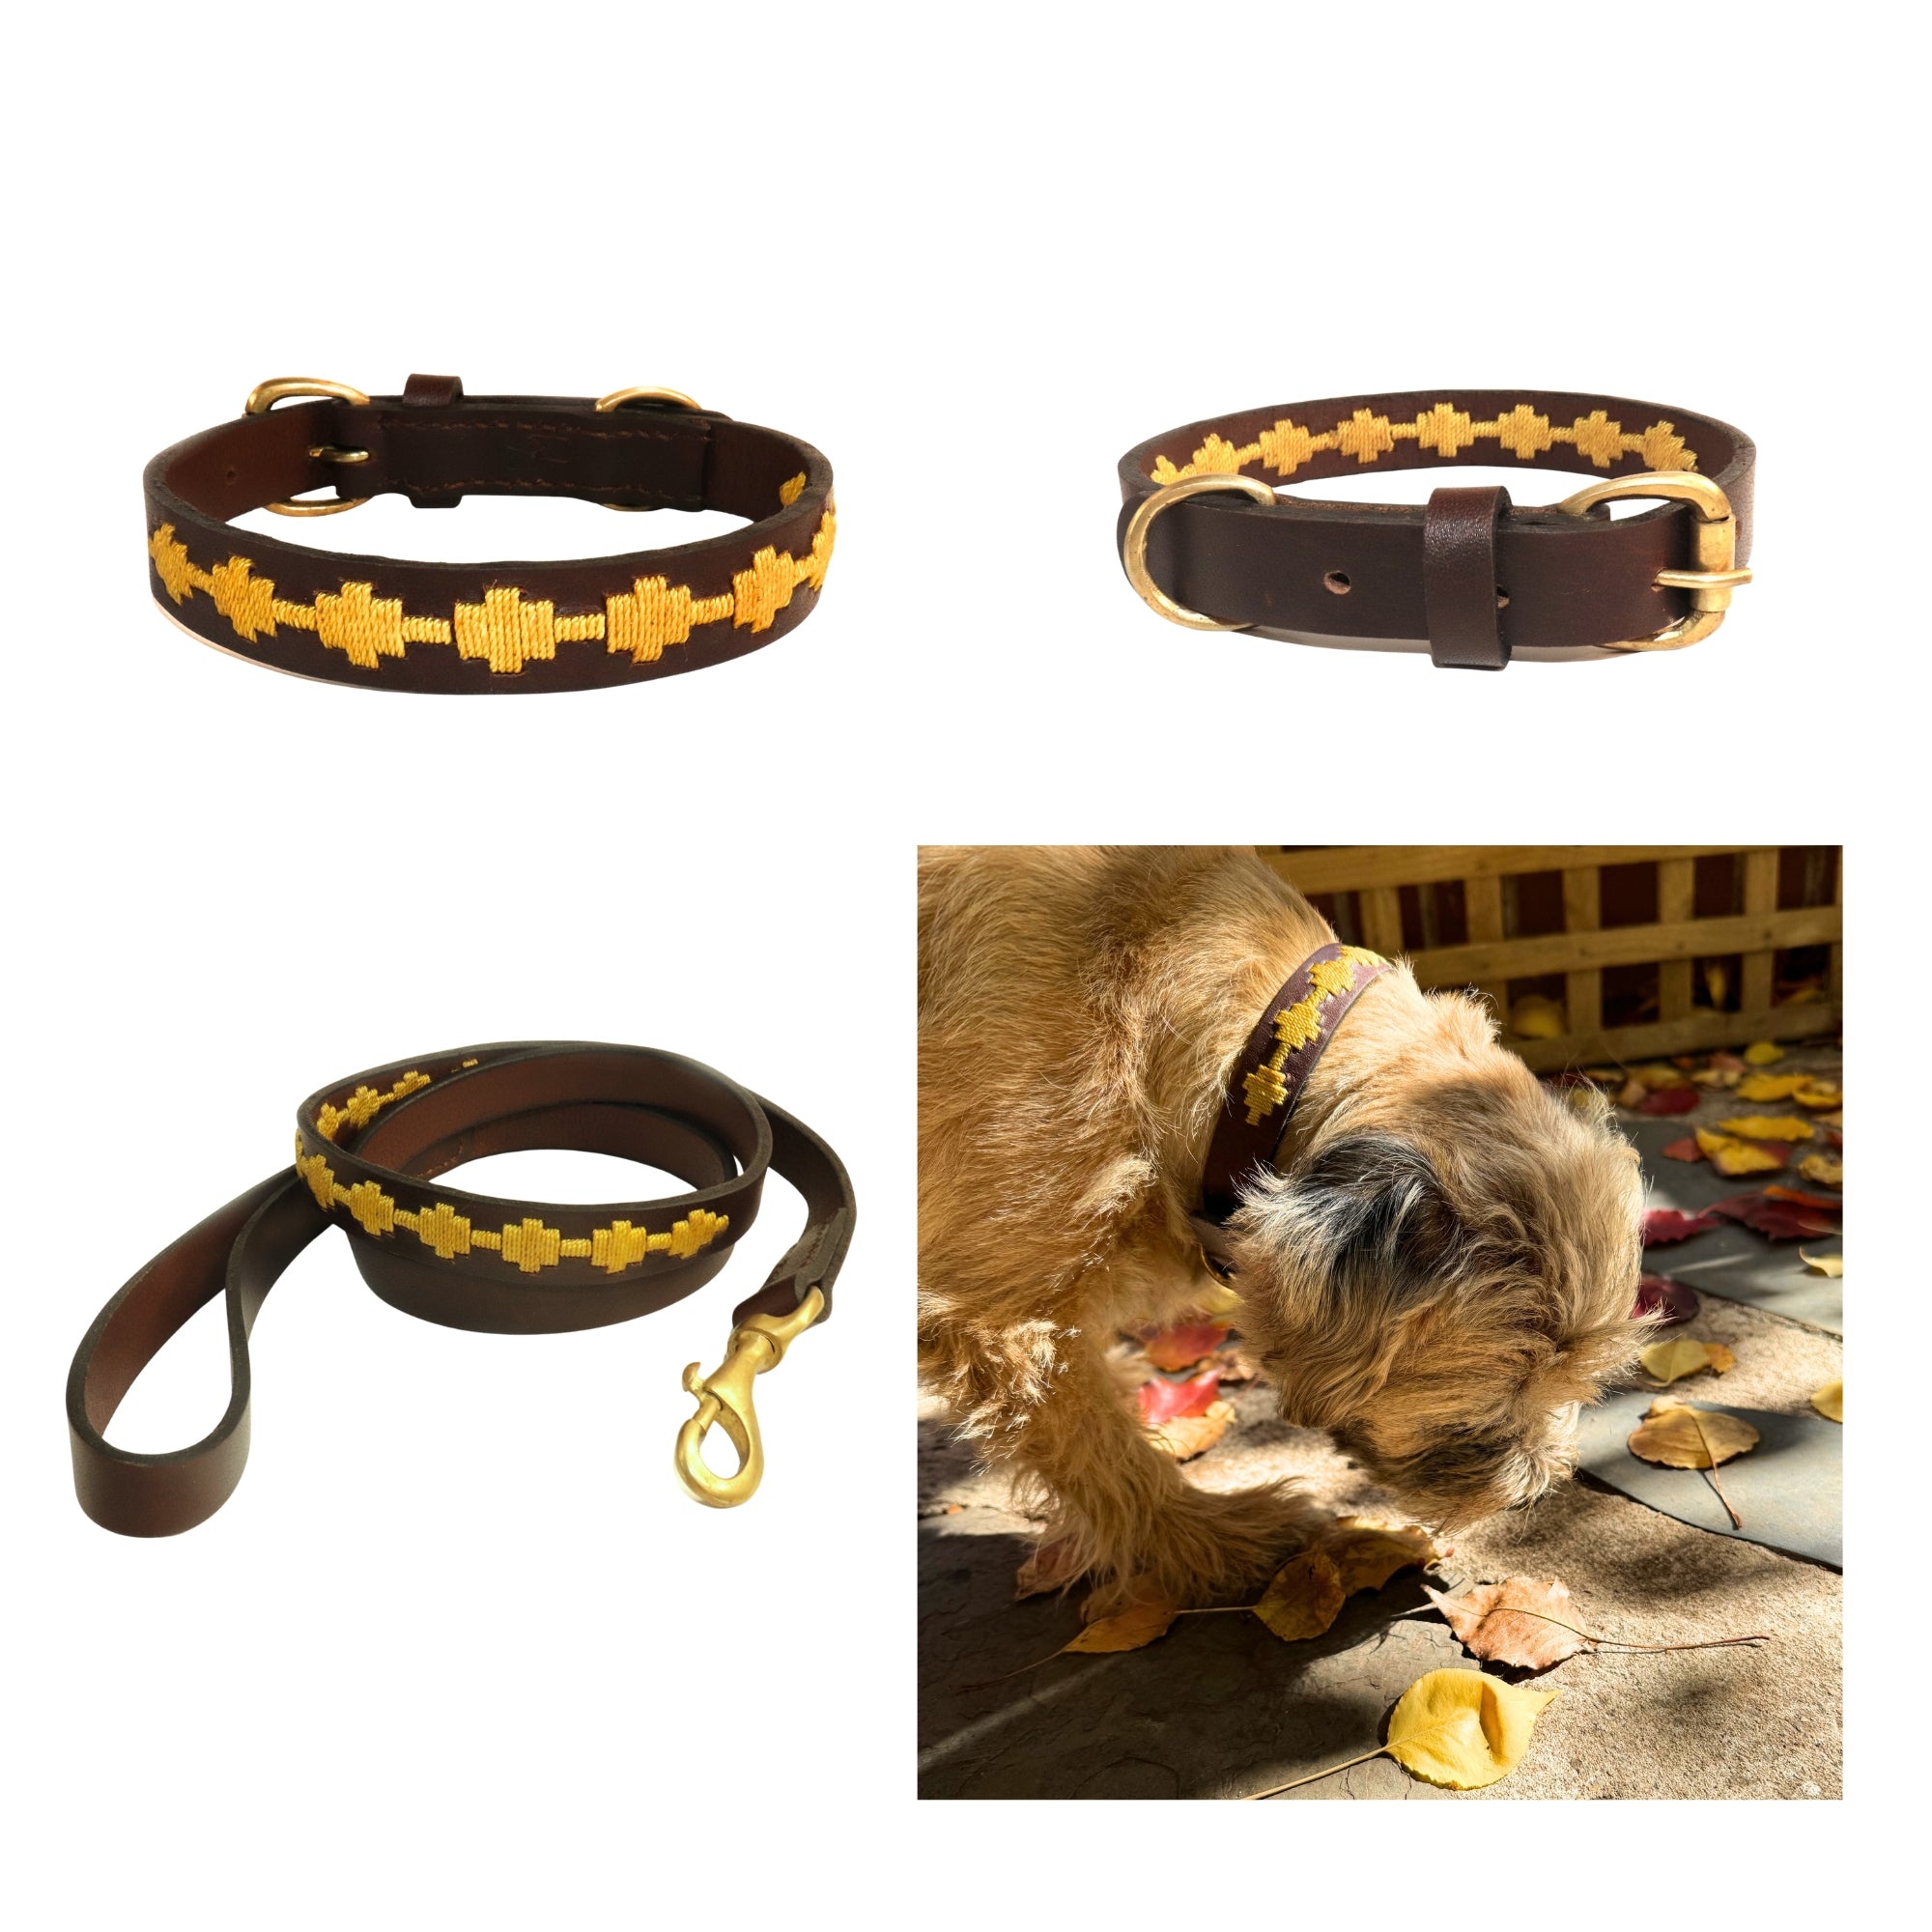 Collage of three images: two showcasing a Georgie Paws handmade Polo Bark Collar - wheat pack and matching leash with a yellow taxi pattern, and one image of a small dog wearing the collar and sniffing fallen leaves.